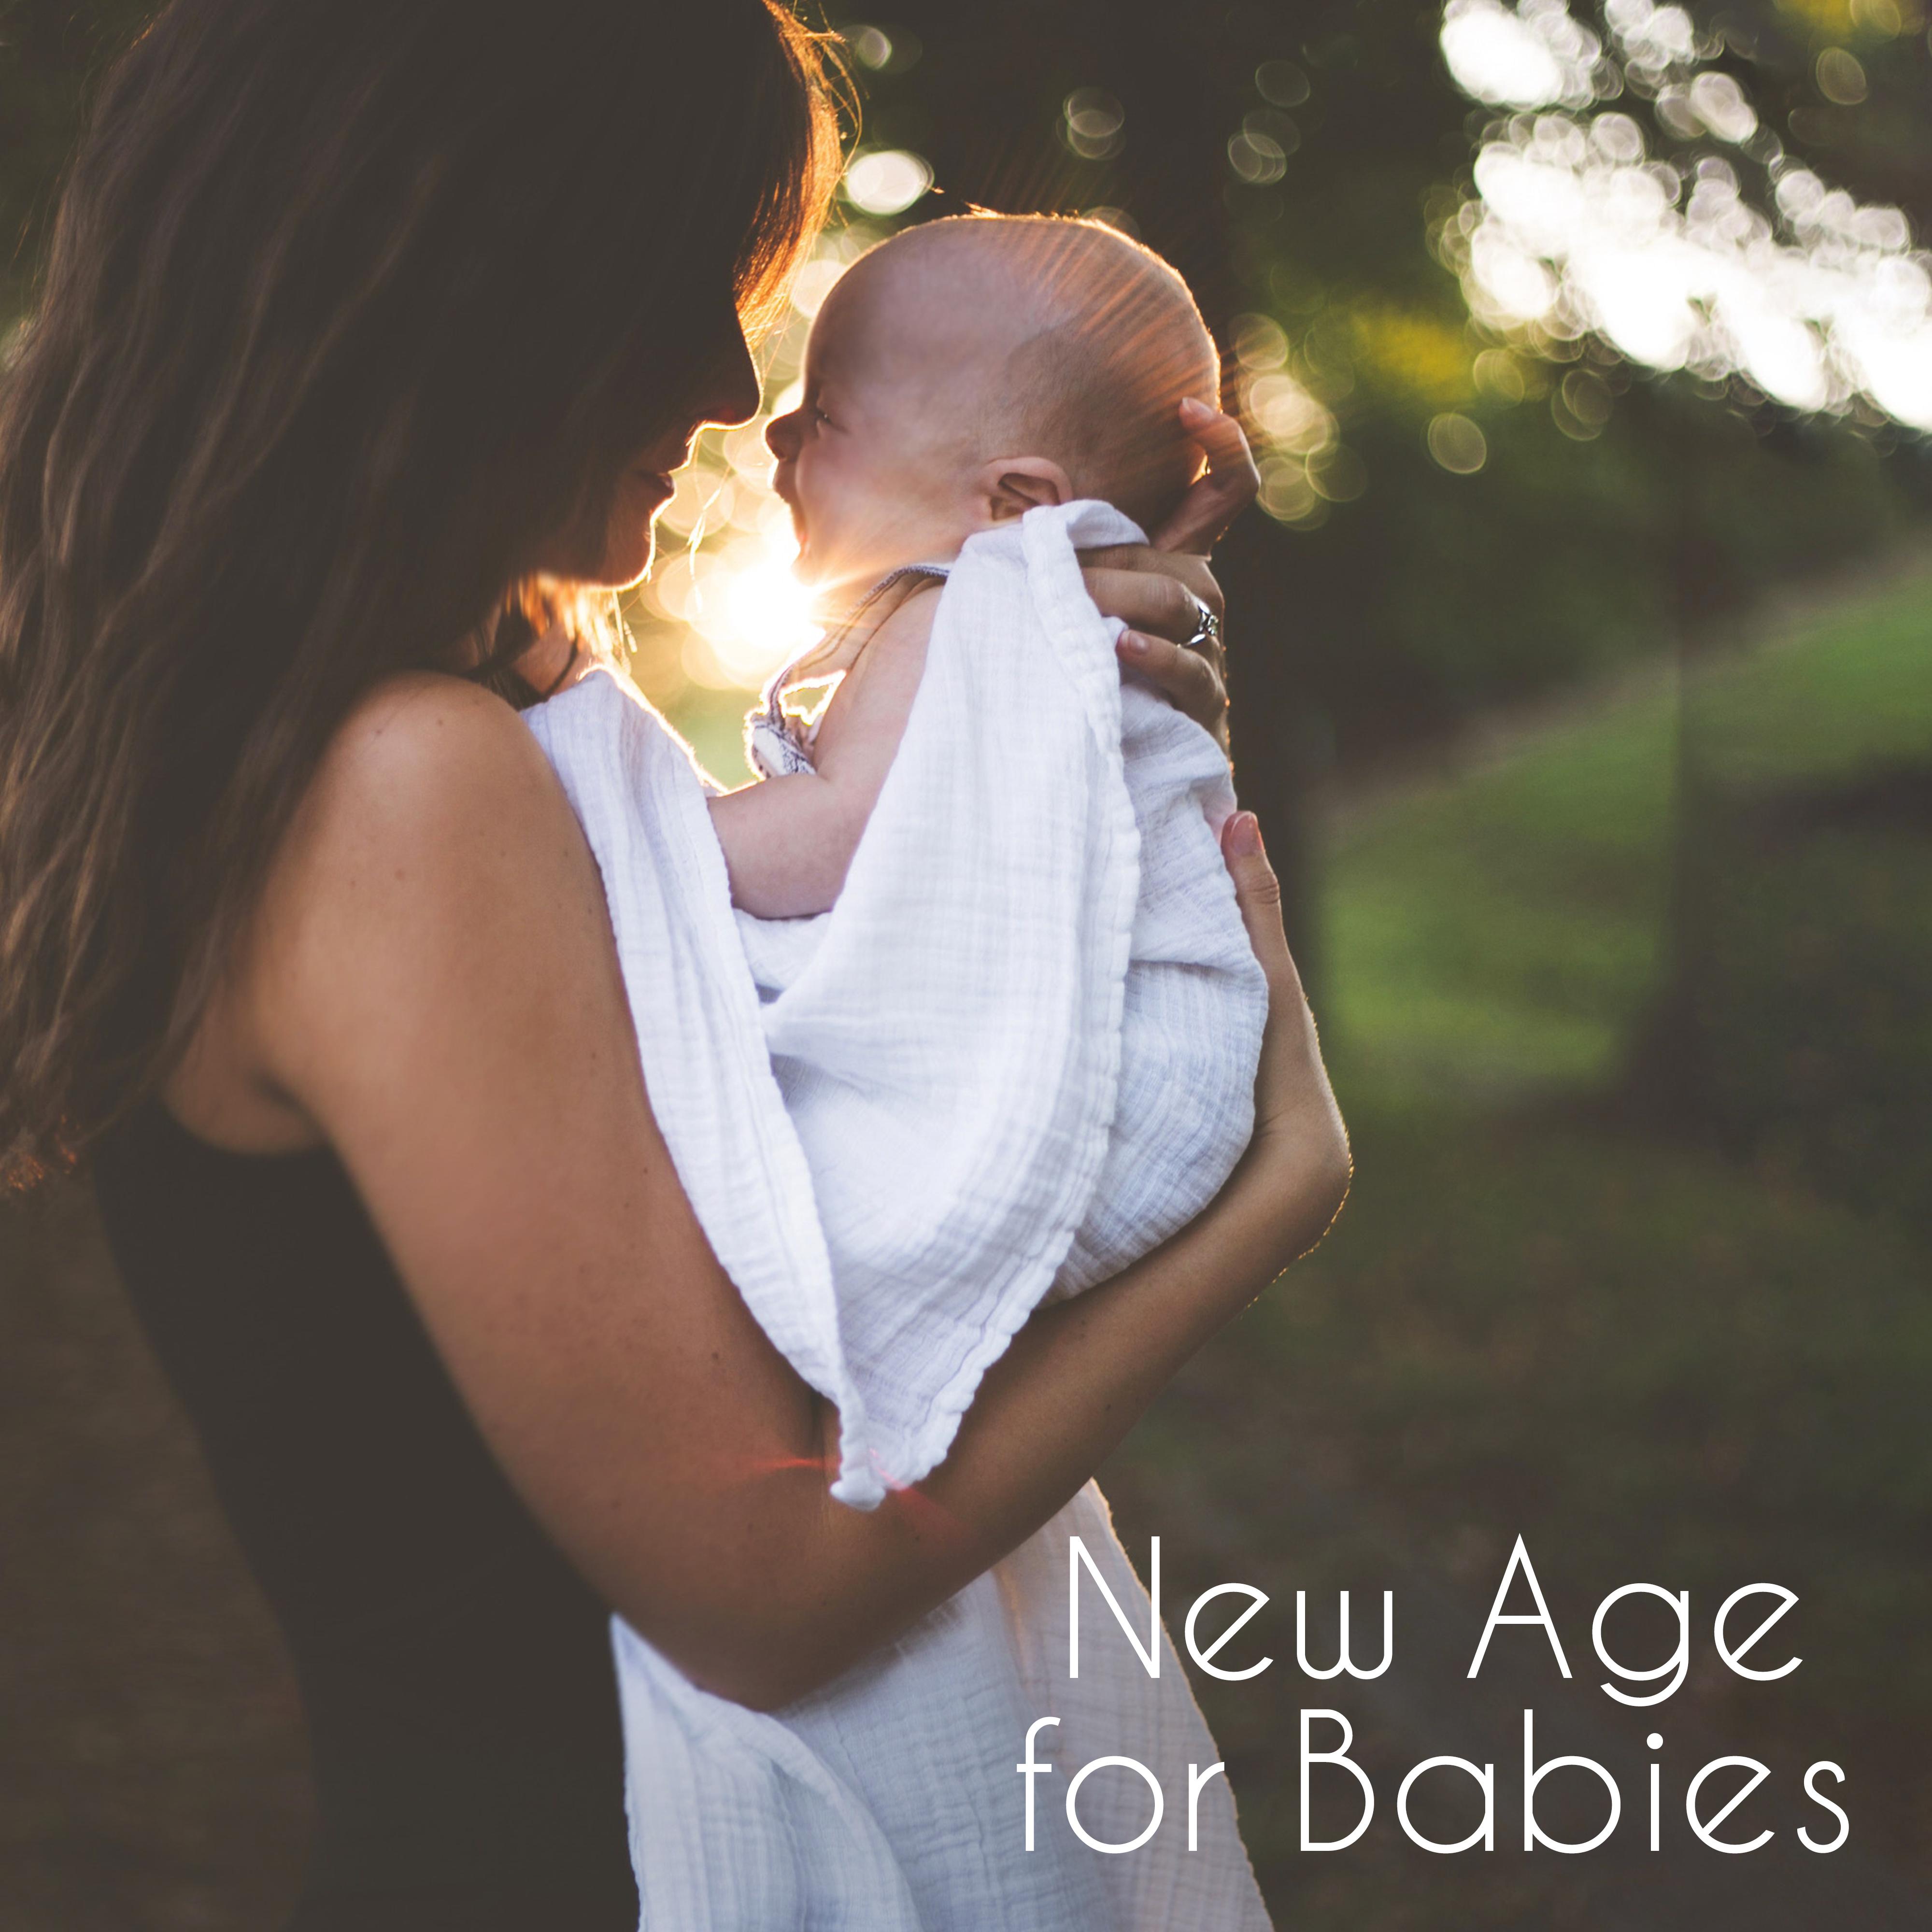 New Age for Babies